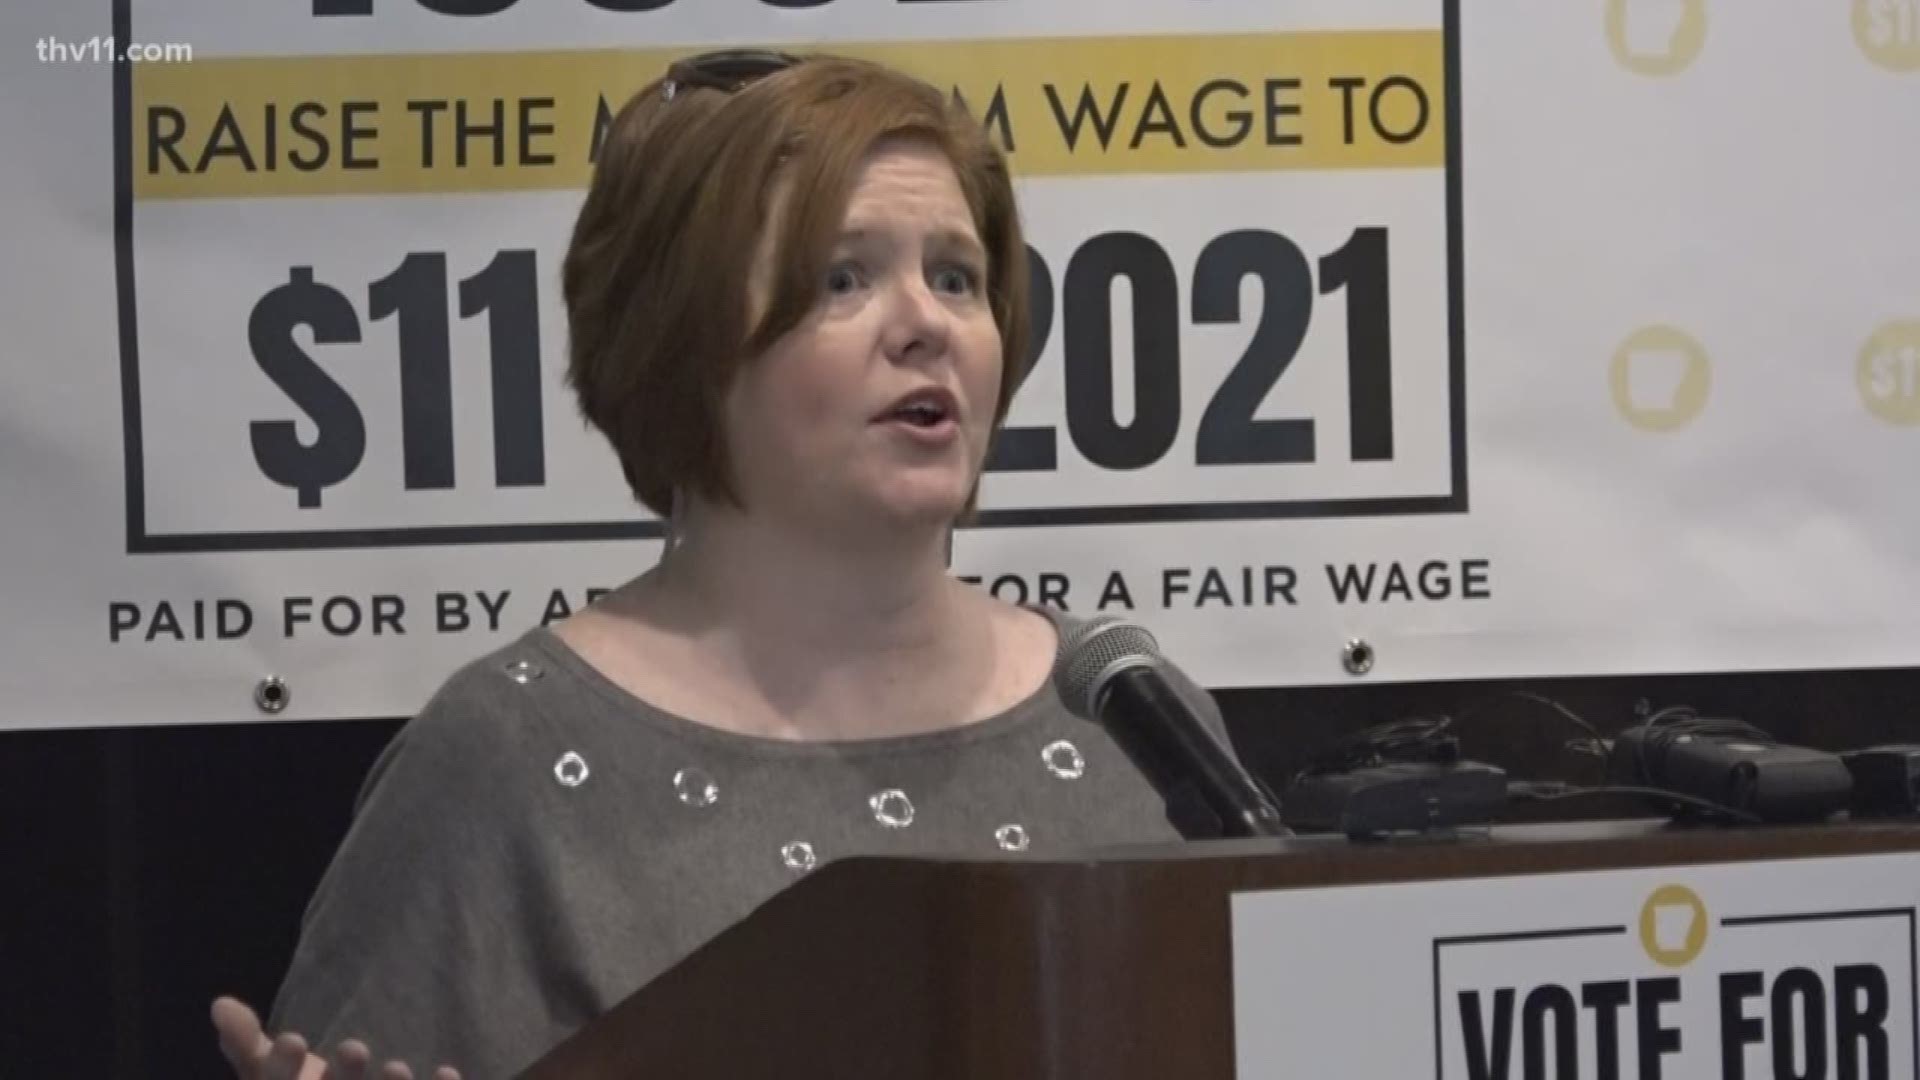 After collecting around 85,000 signatures, a proposed minimum wage increase is one step closer to being on the ballot.